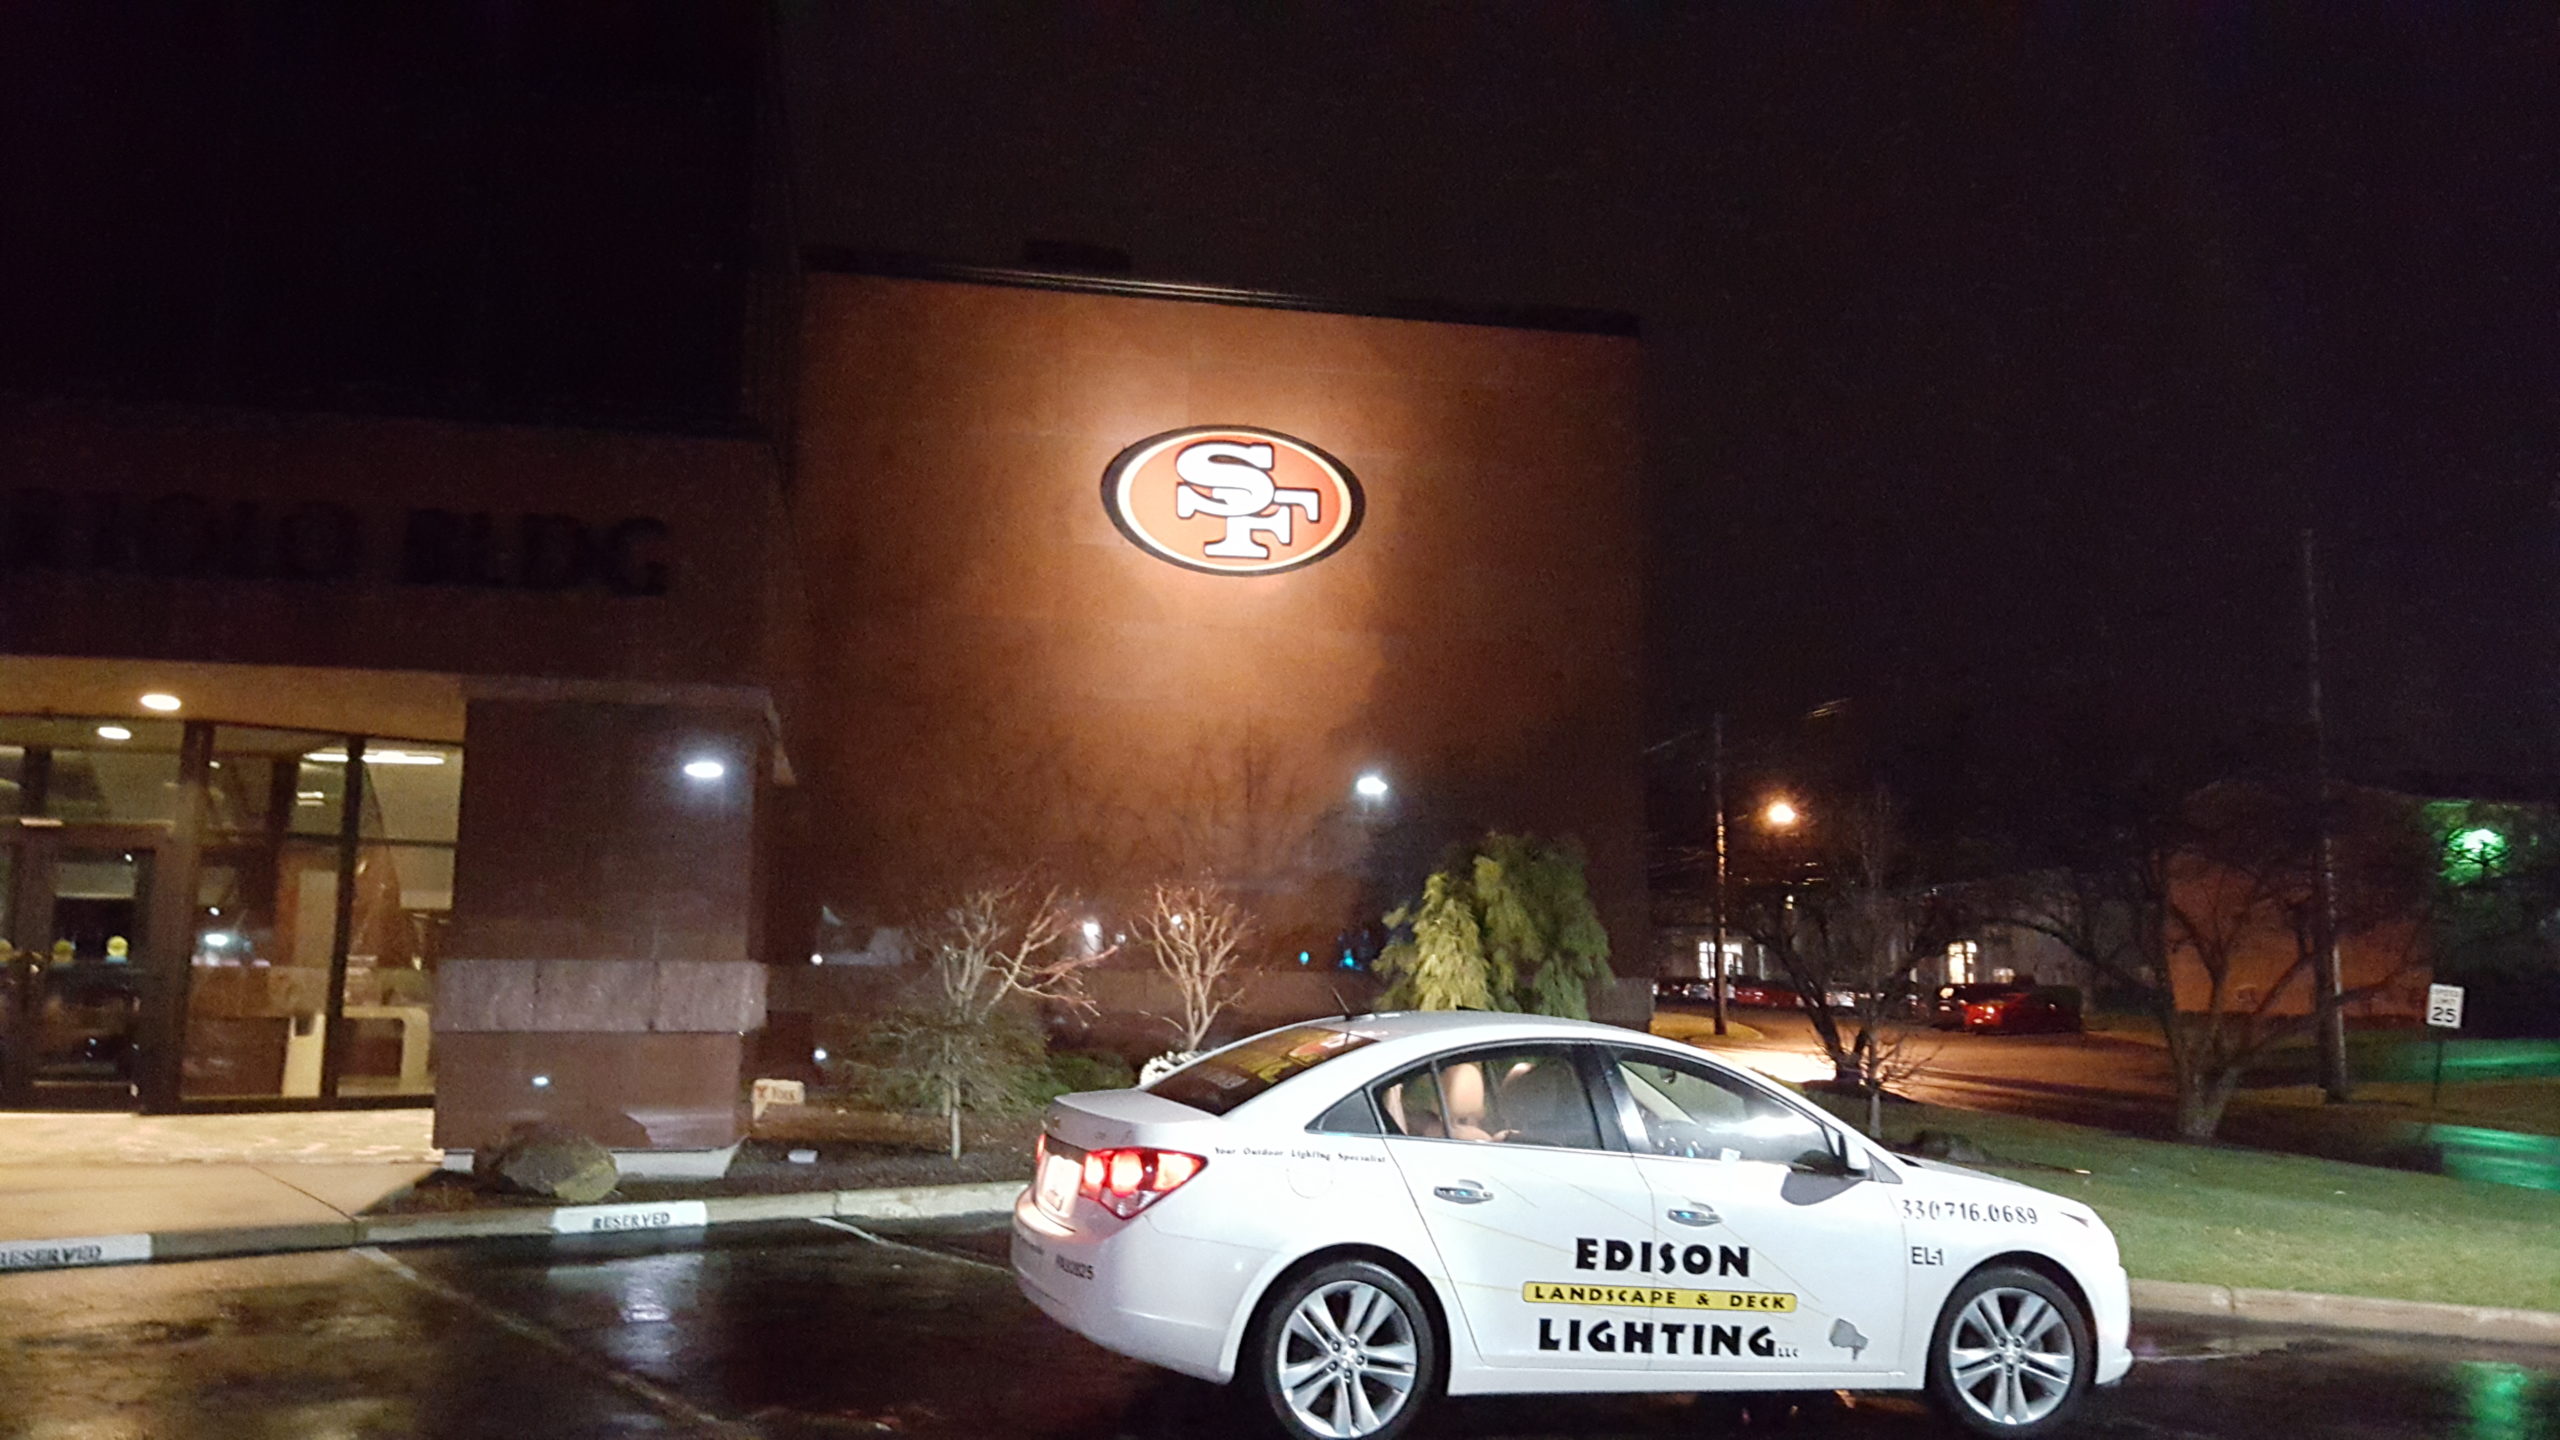 Debartolo building with illuminated 49ers sign with Edison car in parking lot